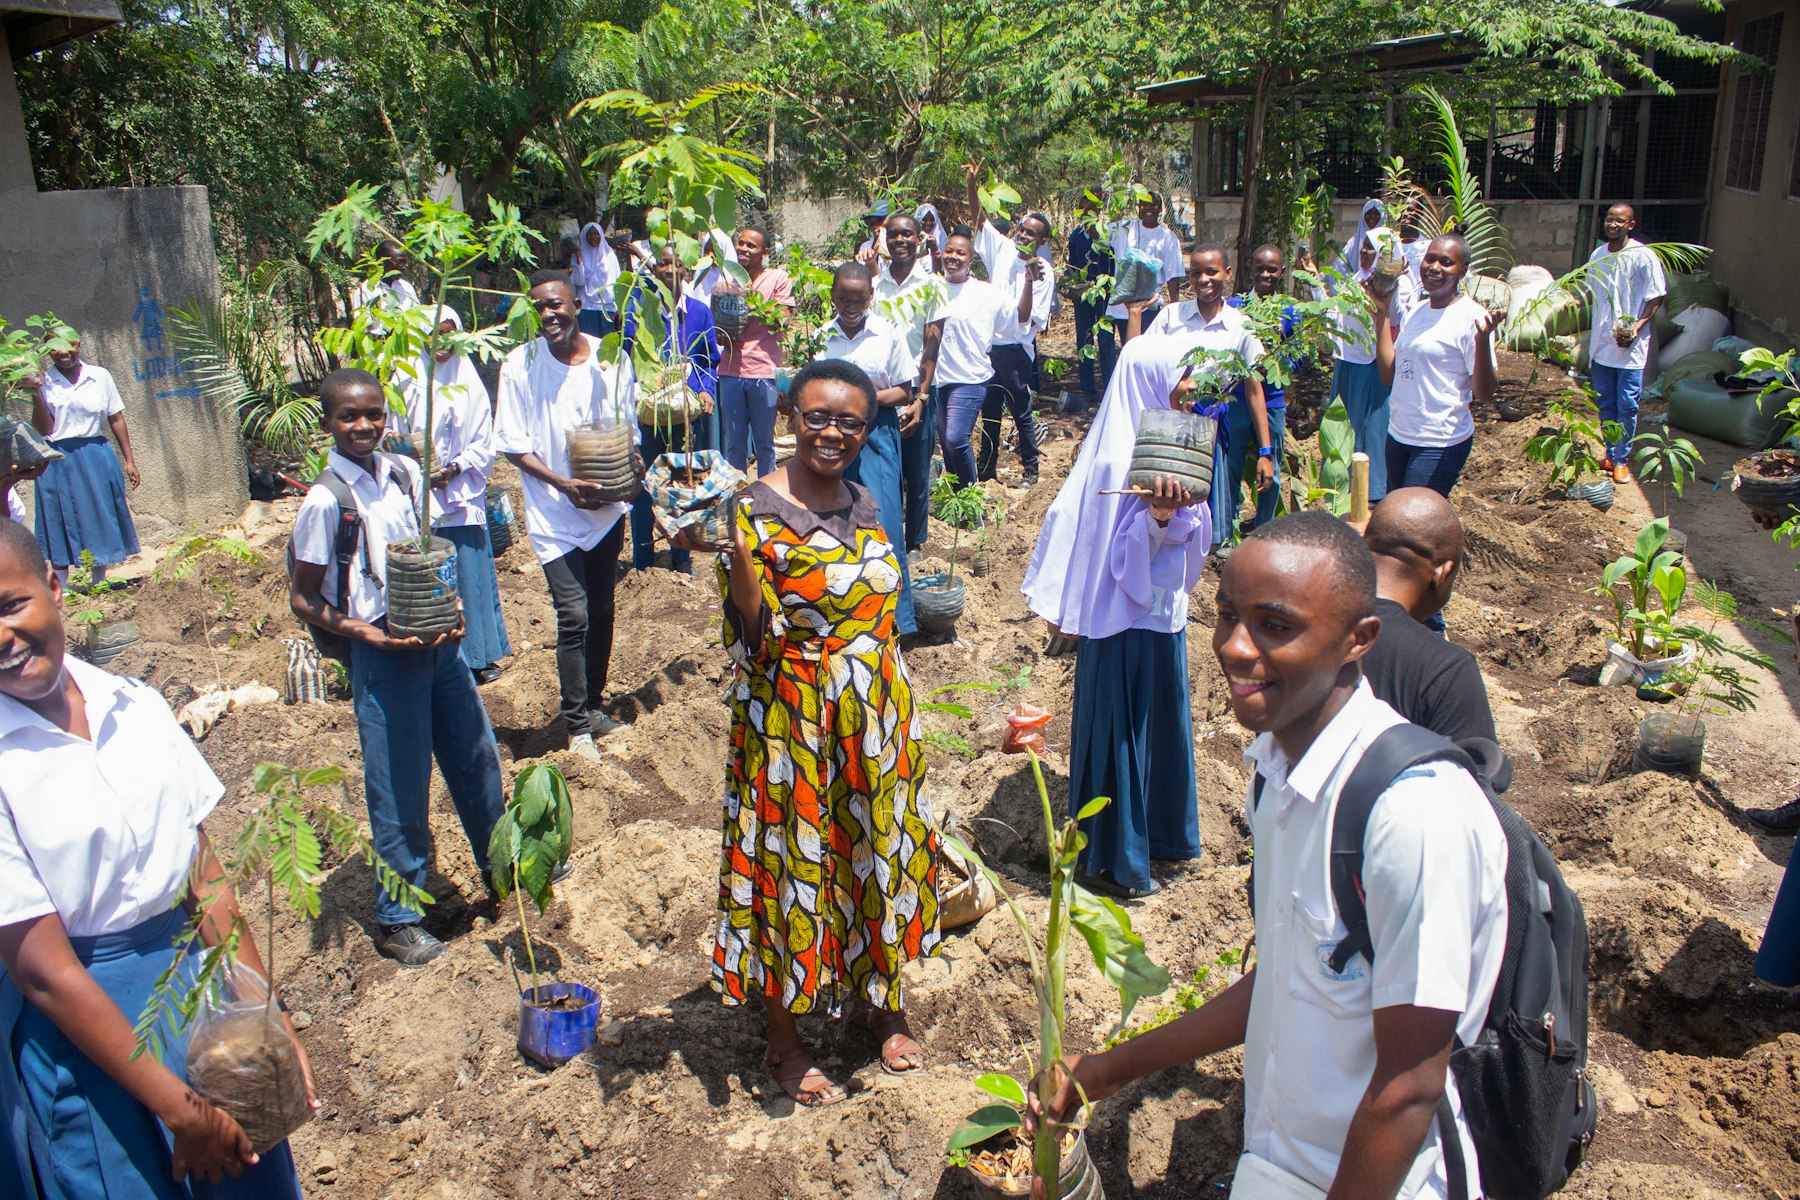 Vailet Semwaiko (centre), teacher at Mbande Secondary School in Dar es Salaam, leads students and volunteer parents in planting micro-forests.